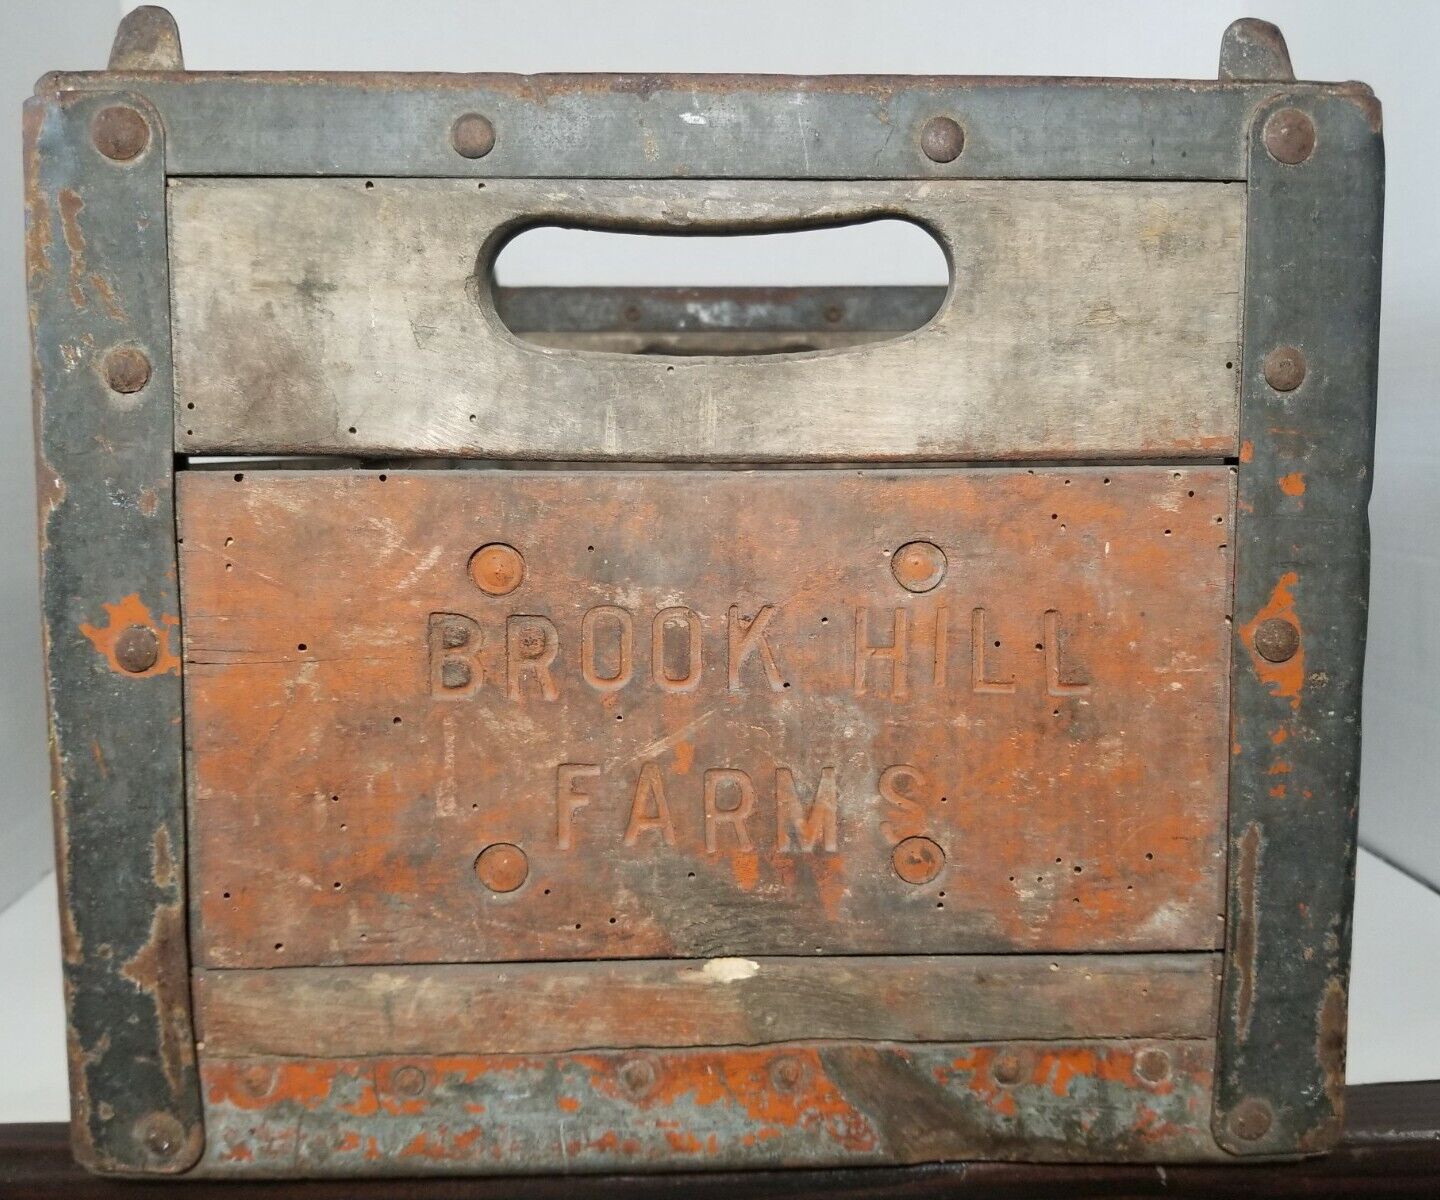 Antique Dairy Milk Bottle Crate Brook Hill Farms Wisconsin Dairy Advertising Old